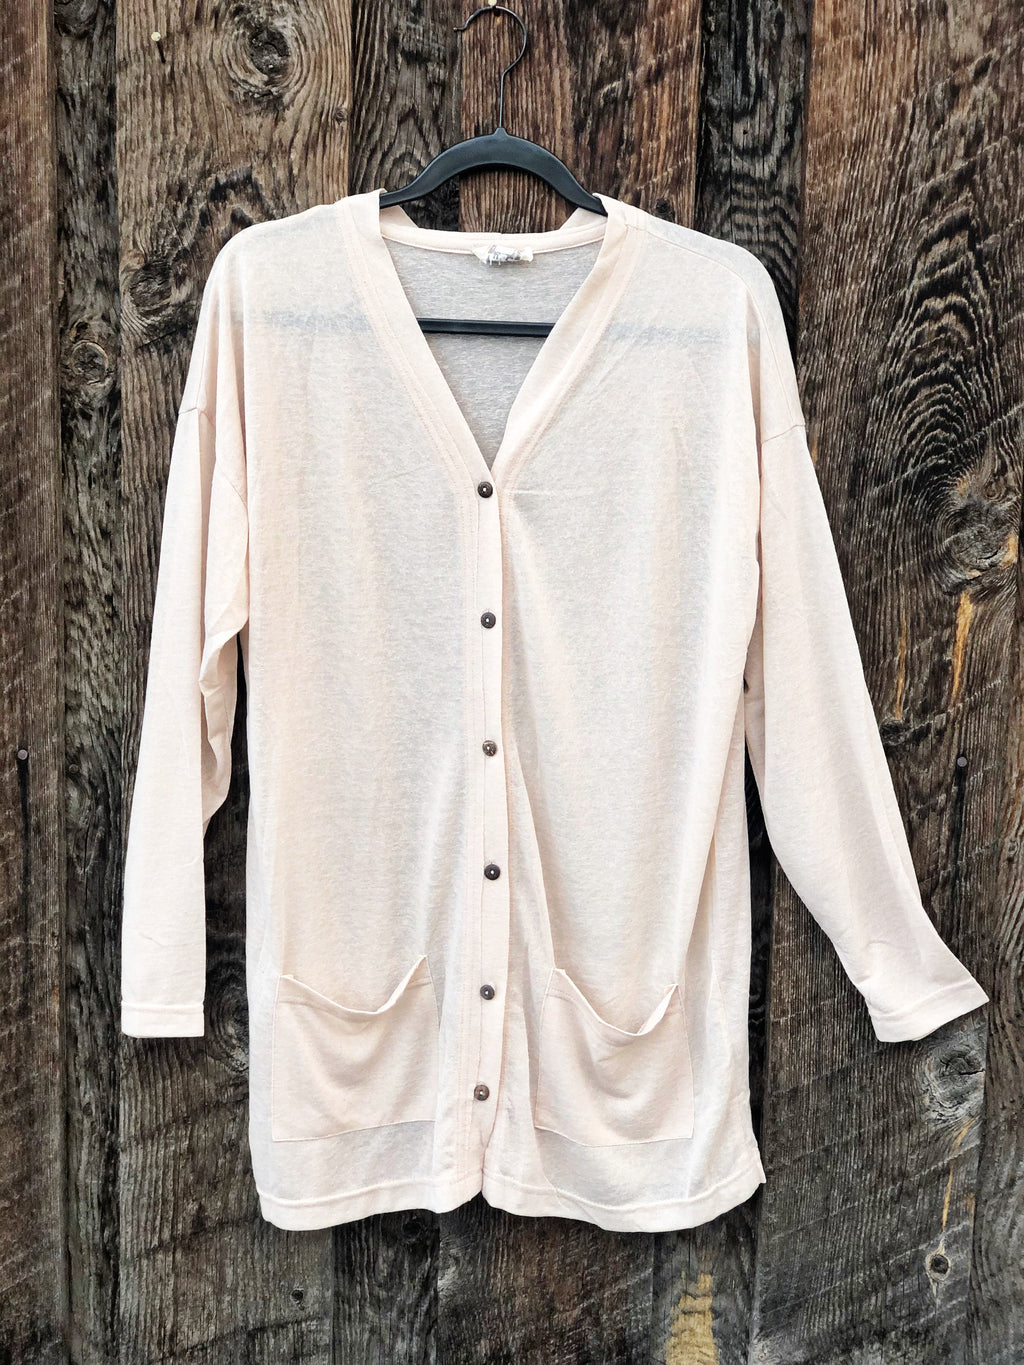 The Spring Layer Cardigan Button Up